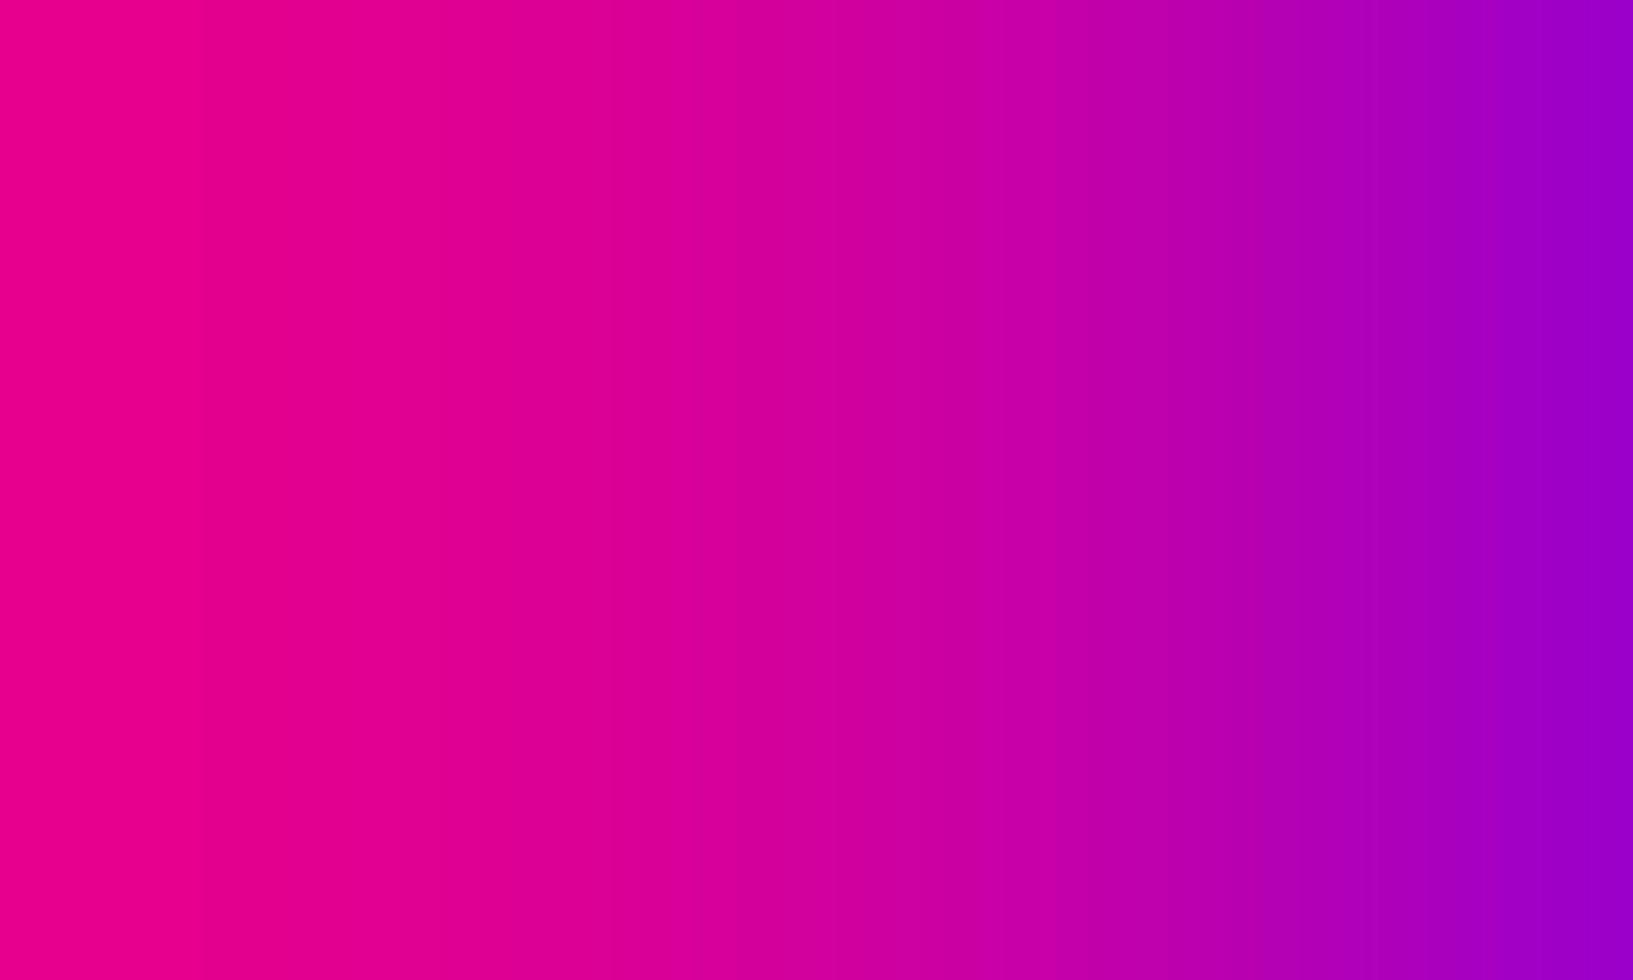 abstract background. pink and purple blend. gradient, simple, cheerful, colors and clean style. suitable for copy space, wallpaper, texture, poster, banner, flyer or decor vector